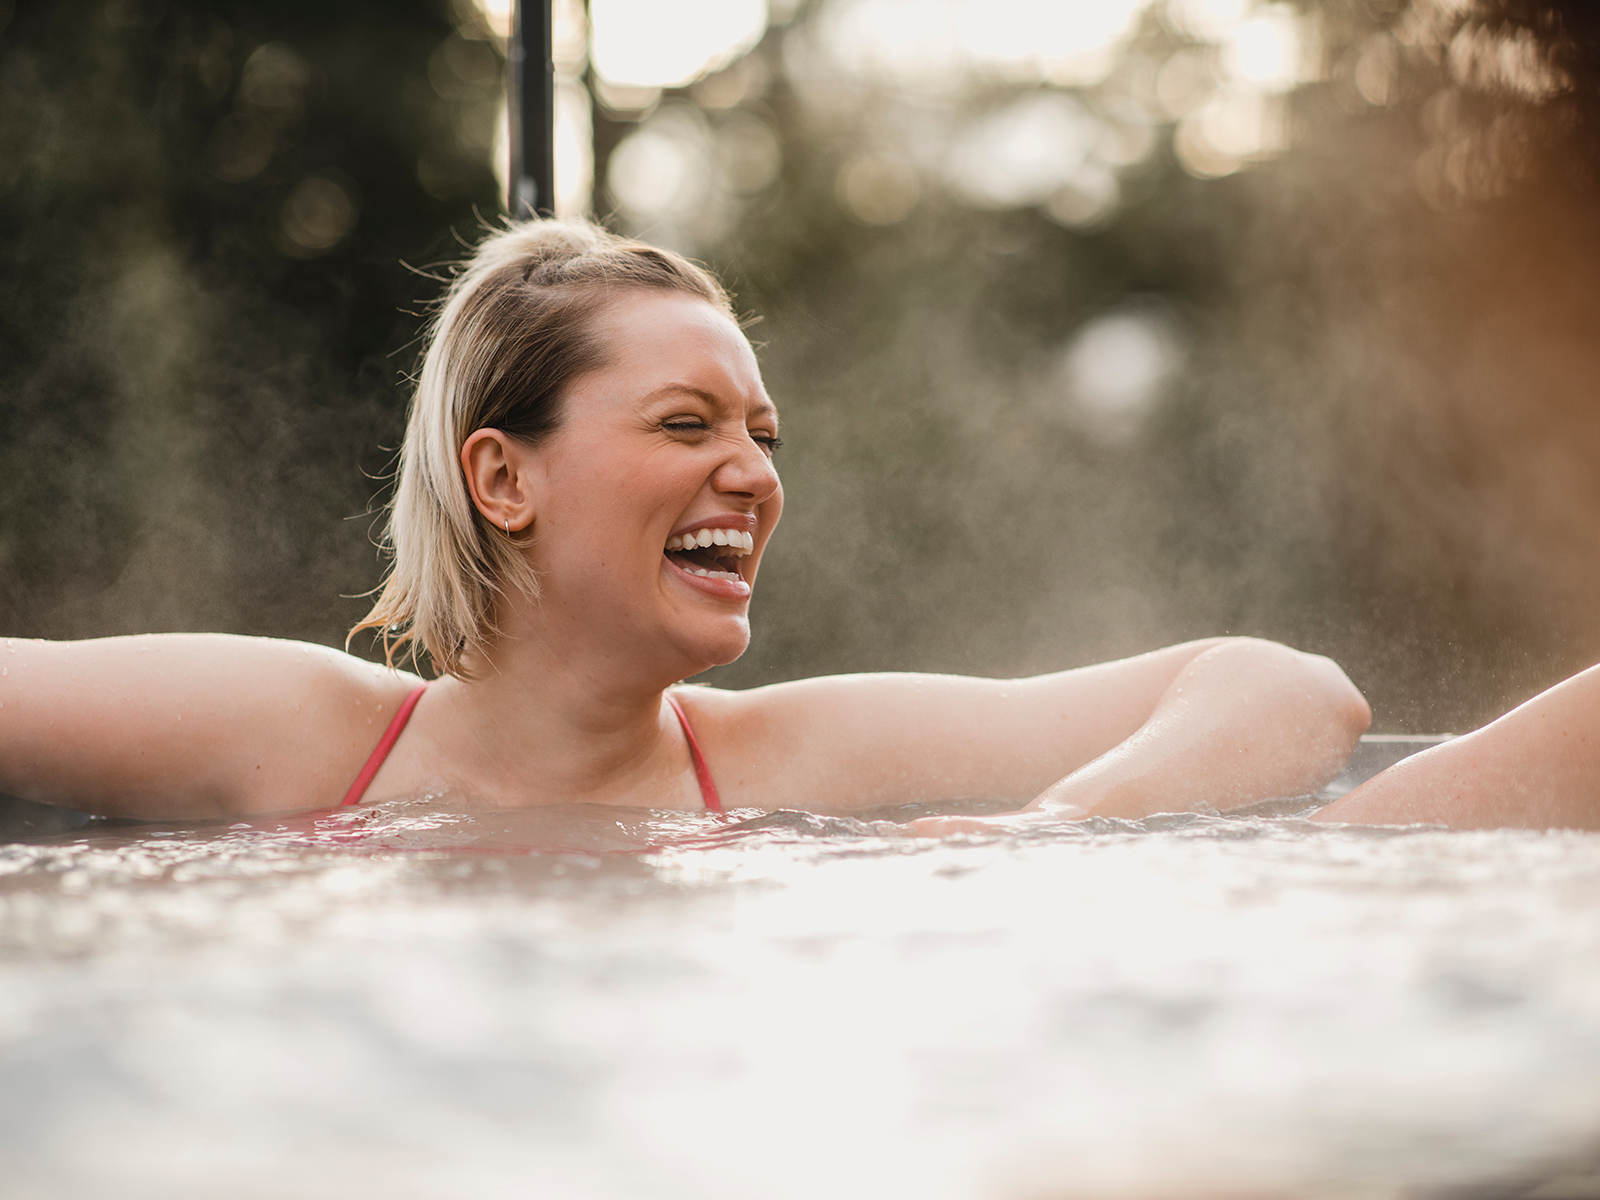 person laughing in hot tub